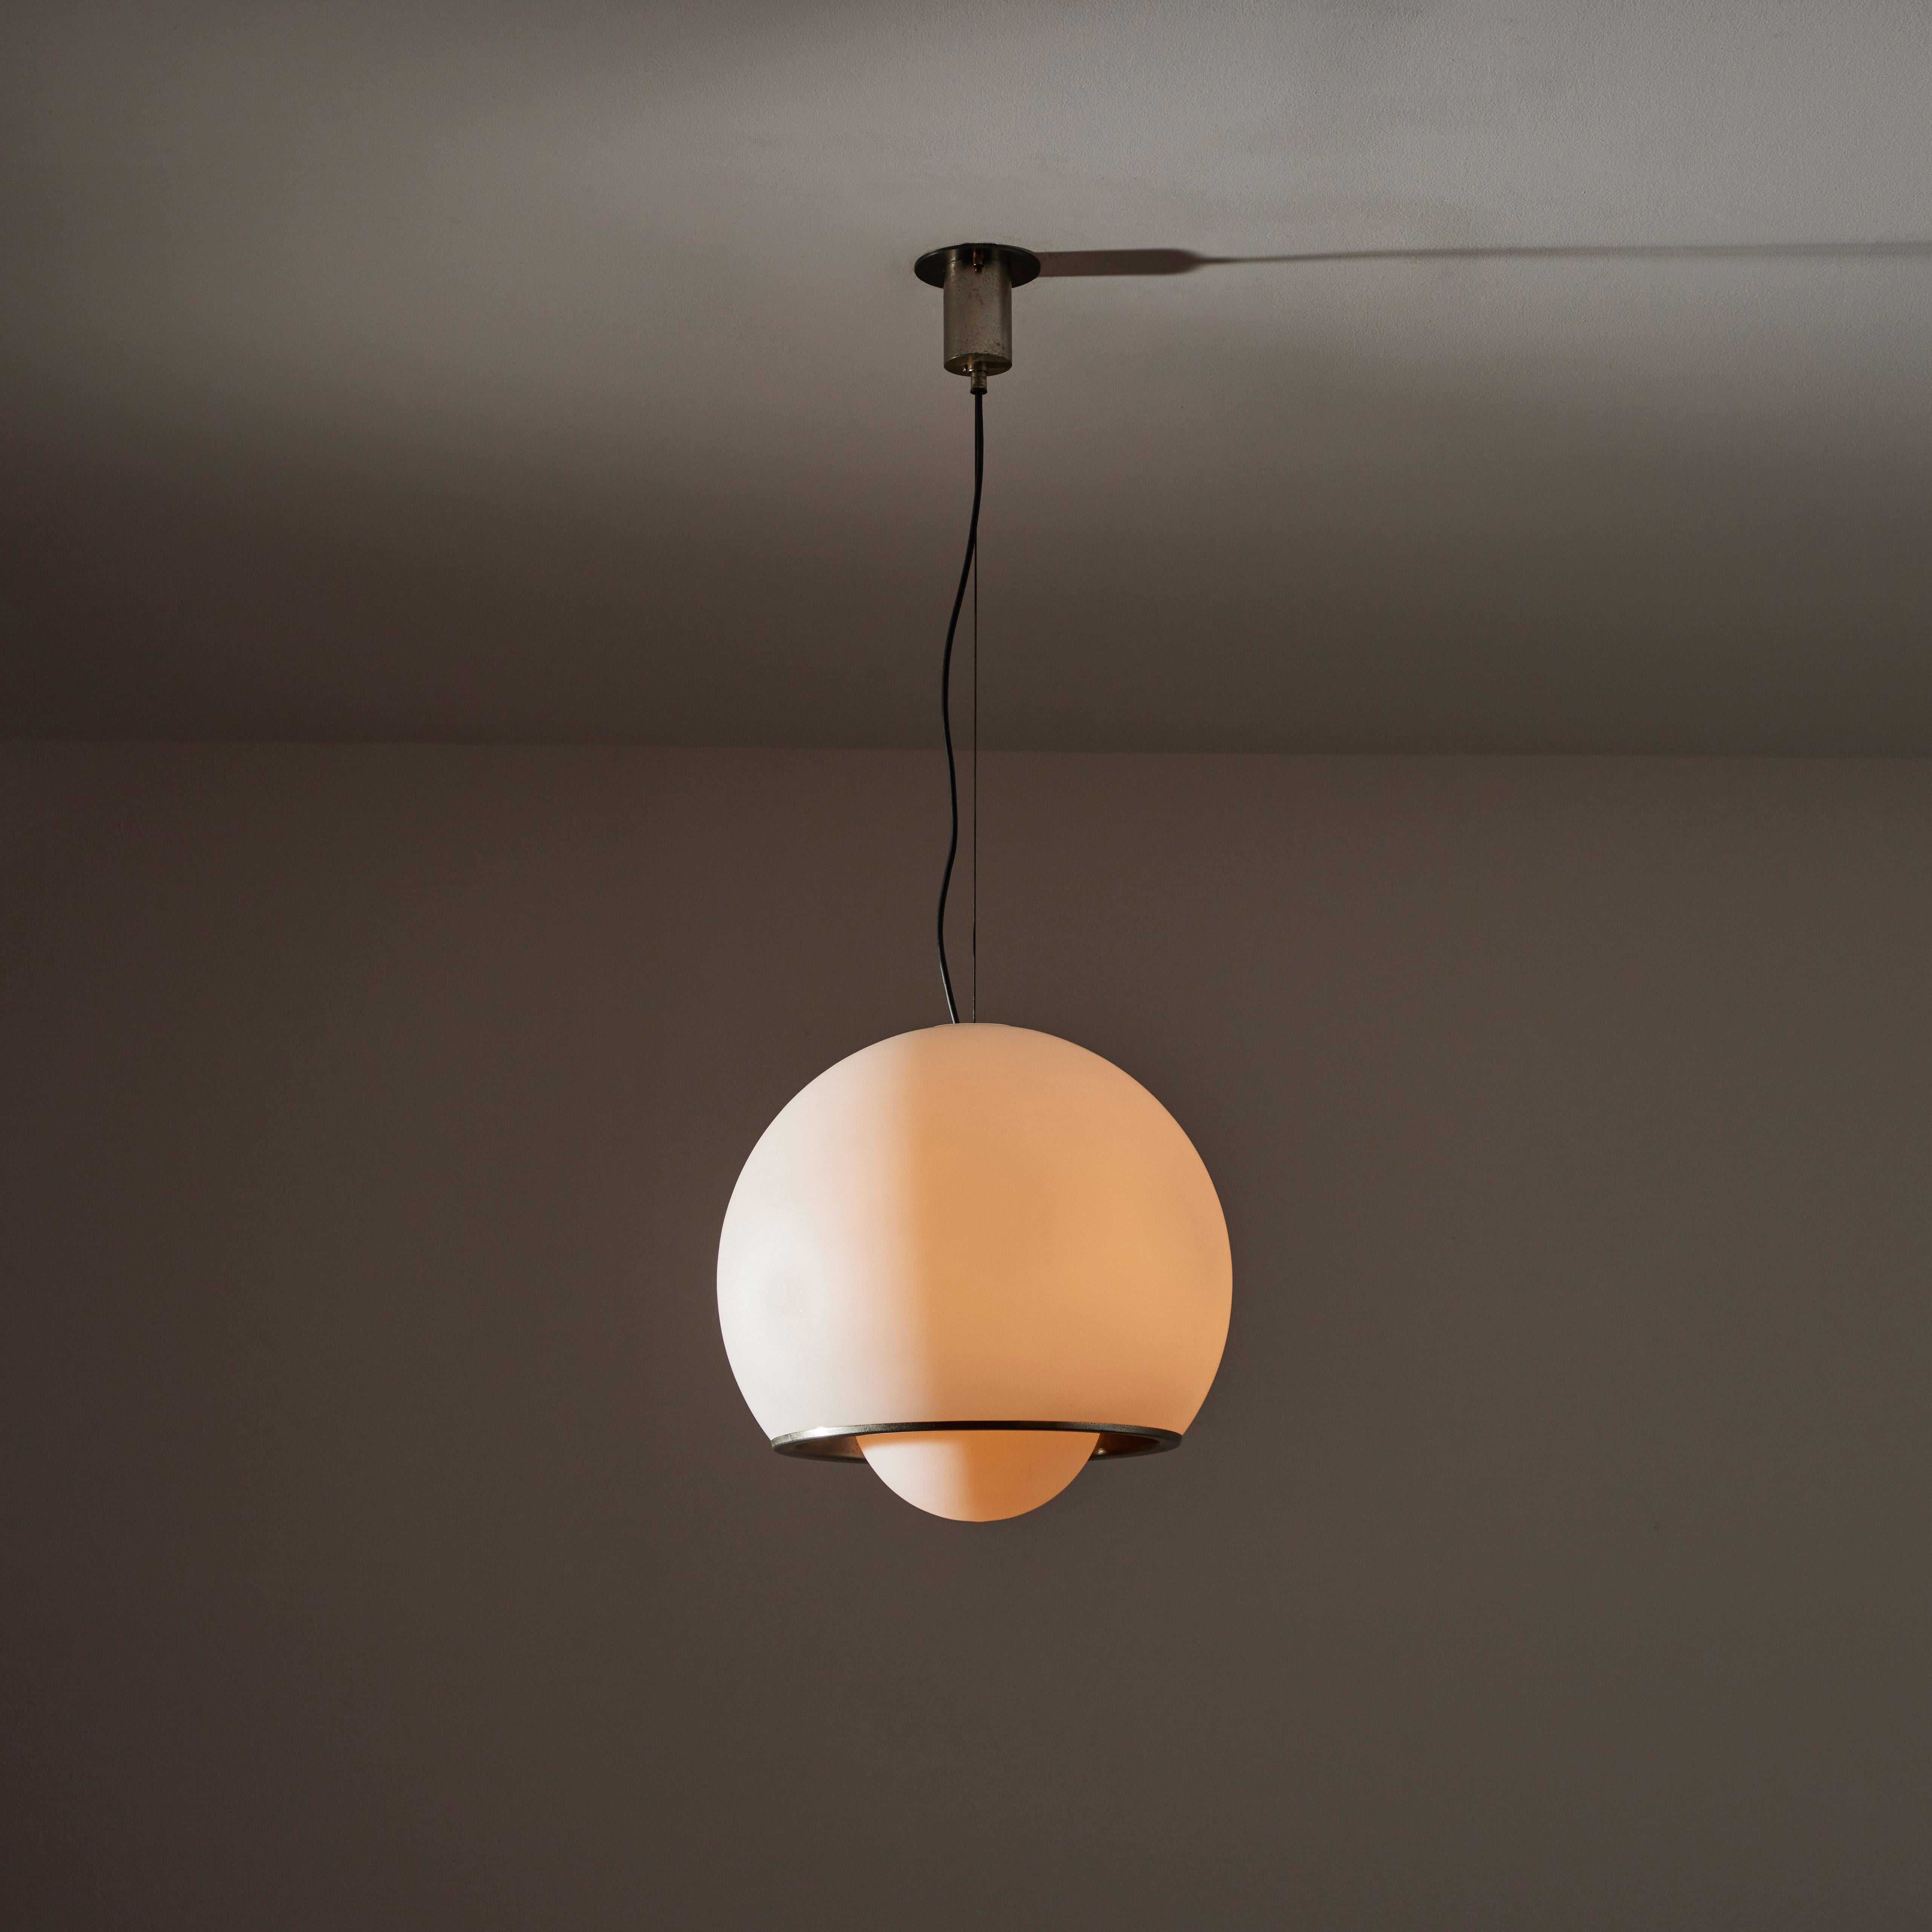 Suspension light by Fontana Arte. Designed and manufactured in Italy, circa 1960s. Satin glass diffuser, satin nickel hardware. Custom ceiling plate. Rewired for U.S. standards. We recommend one E27 60 watt maximum bulb. Recommend Lamping: 120v 1